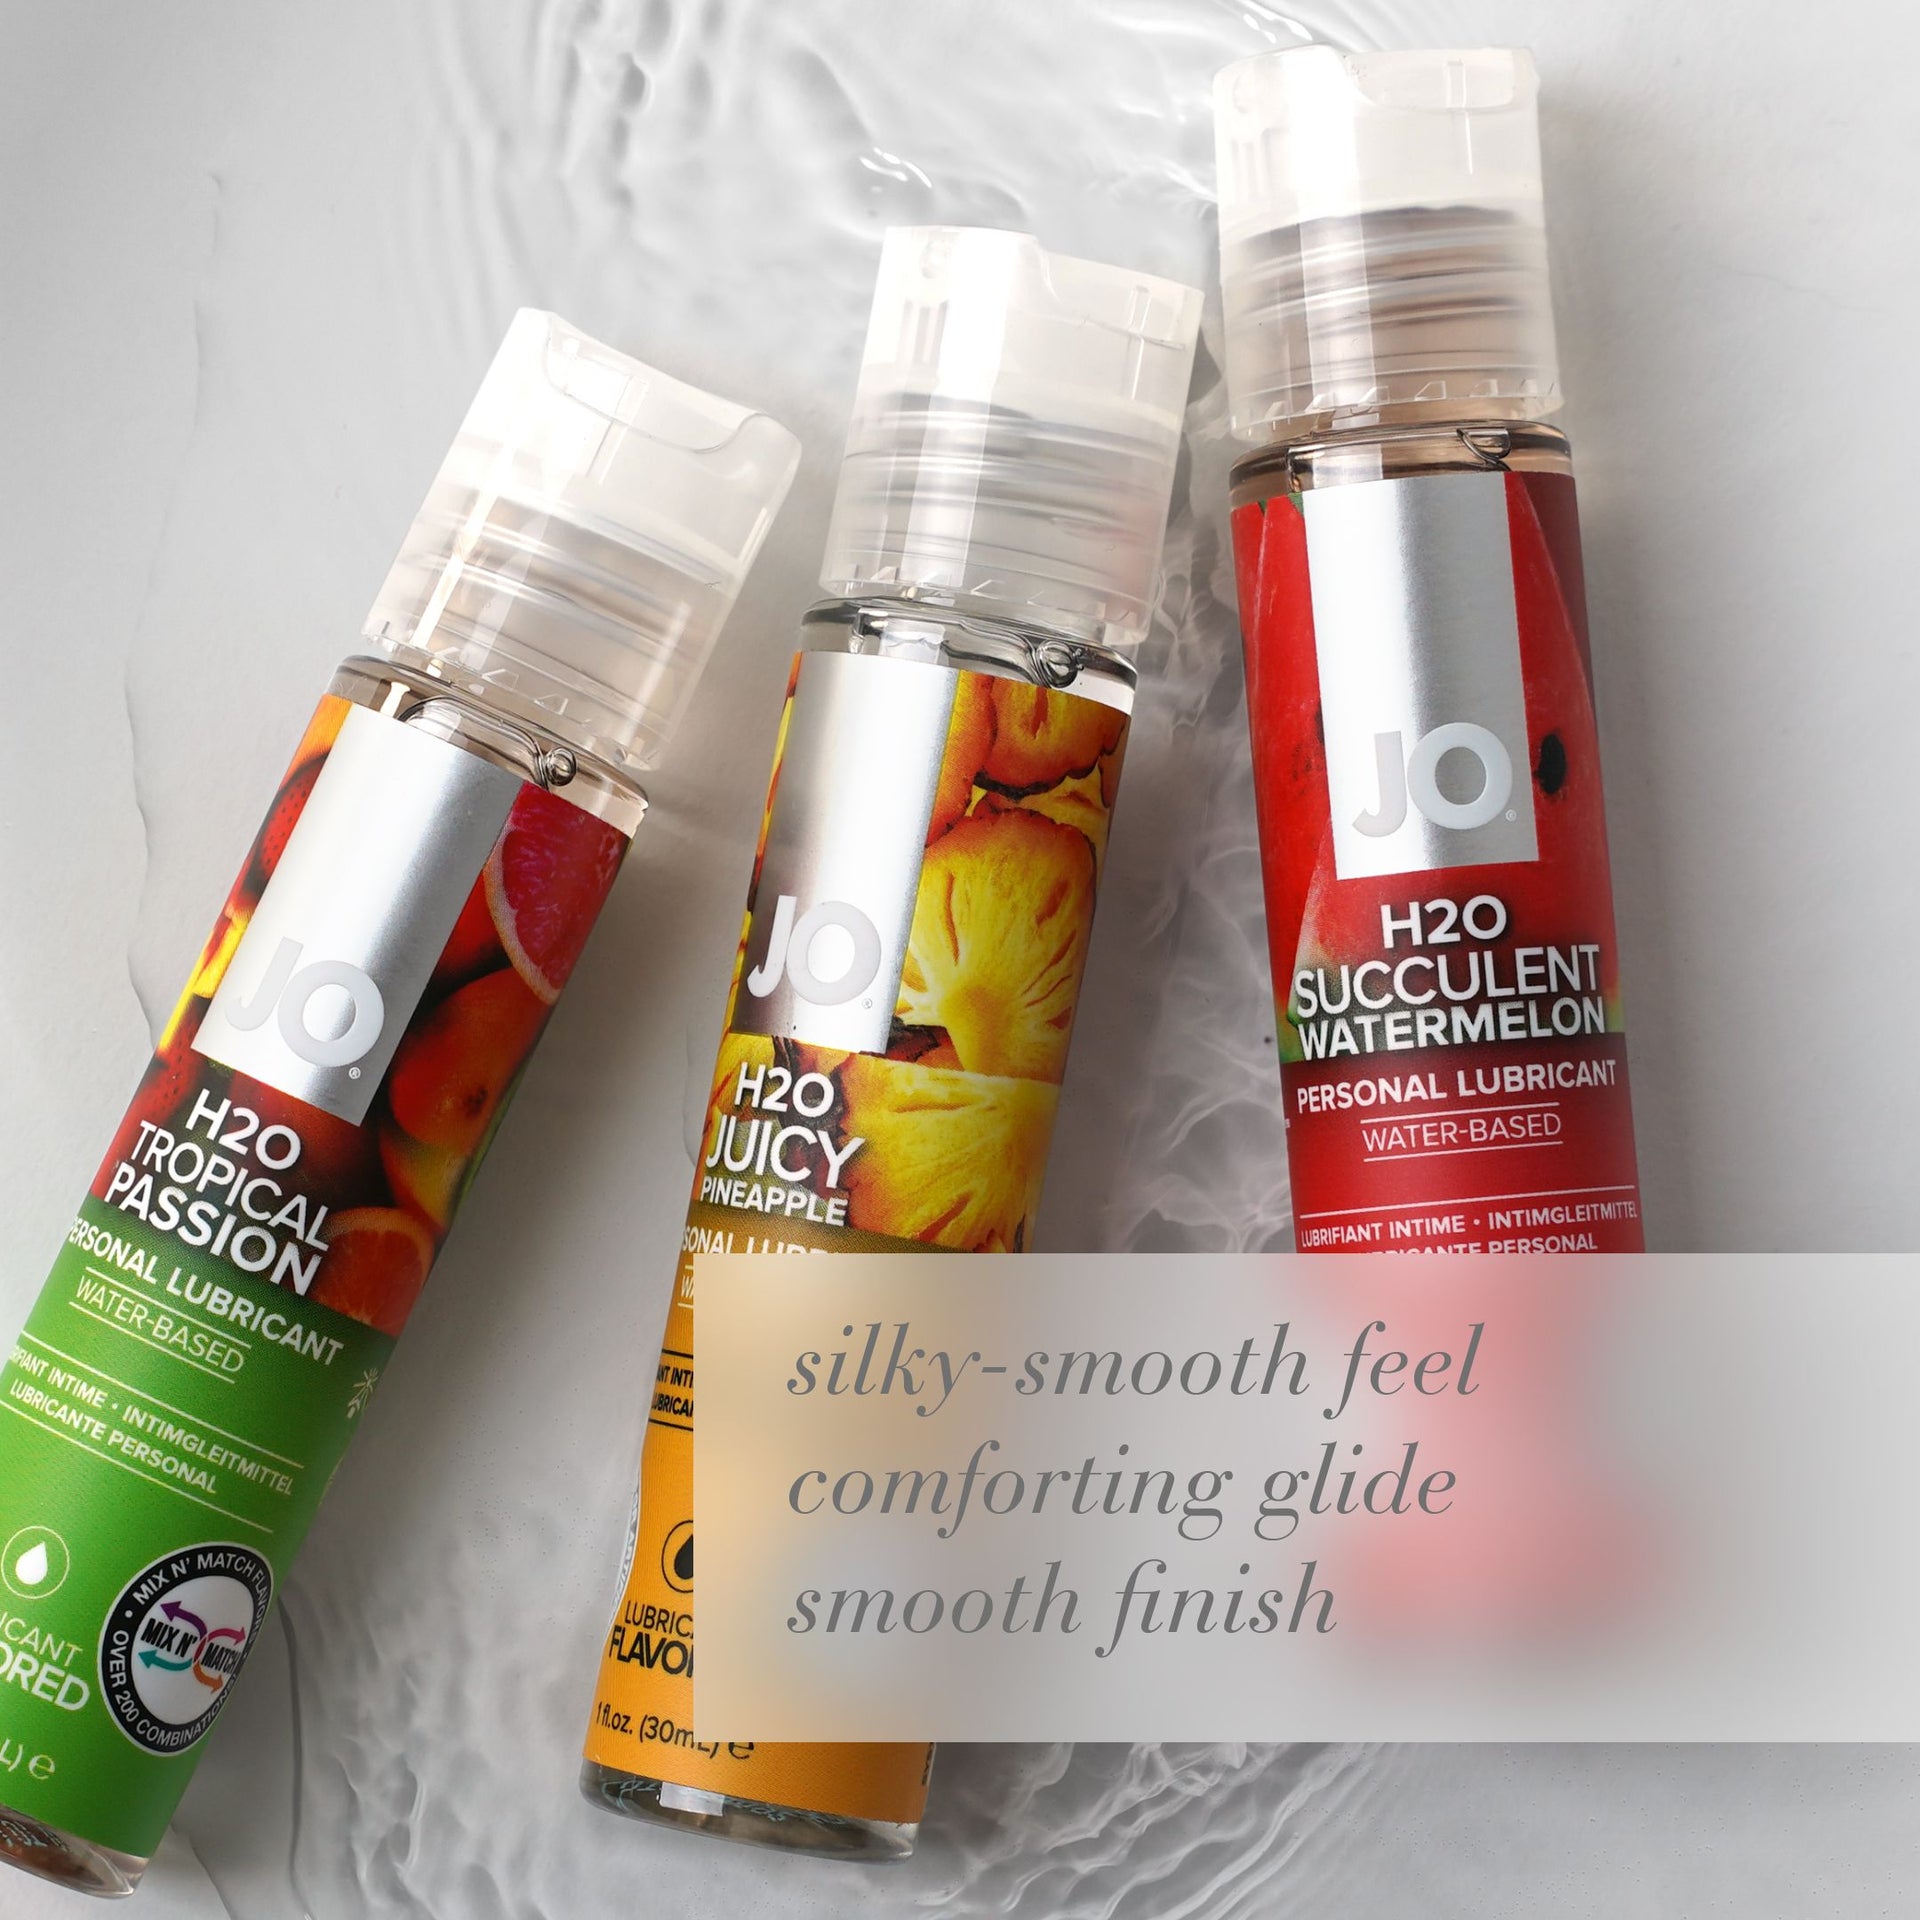 tropical passion lubricant claims